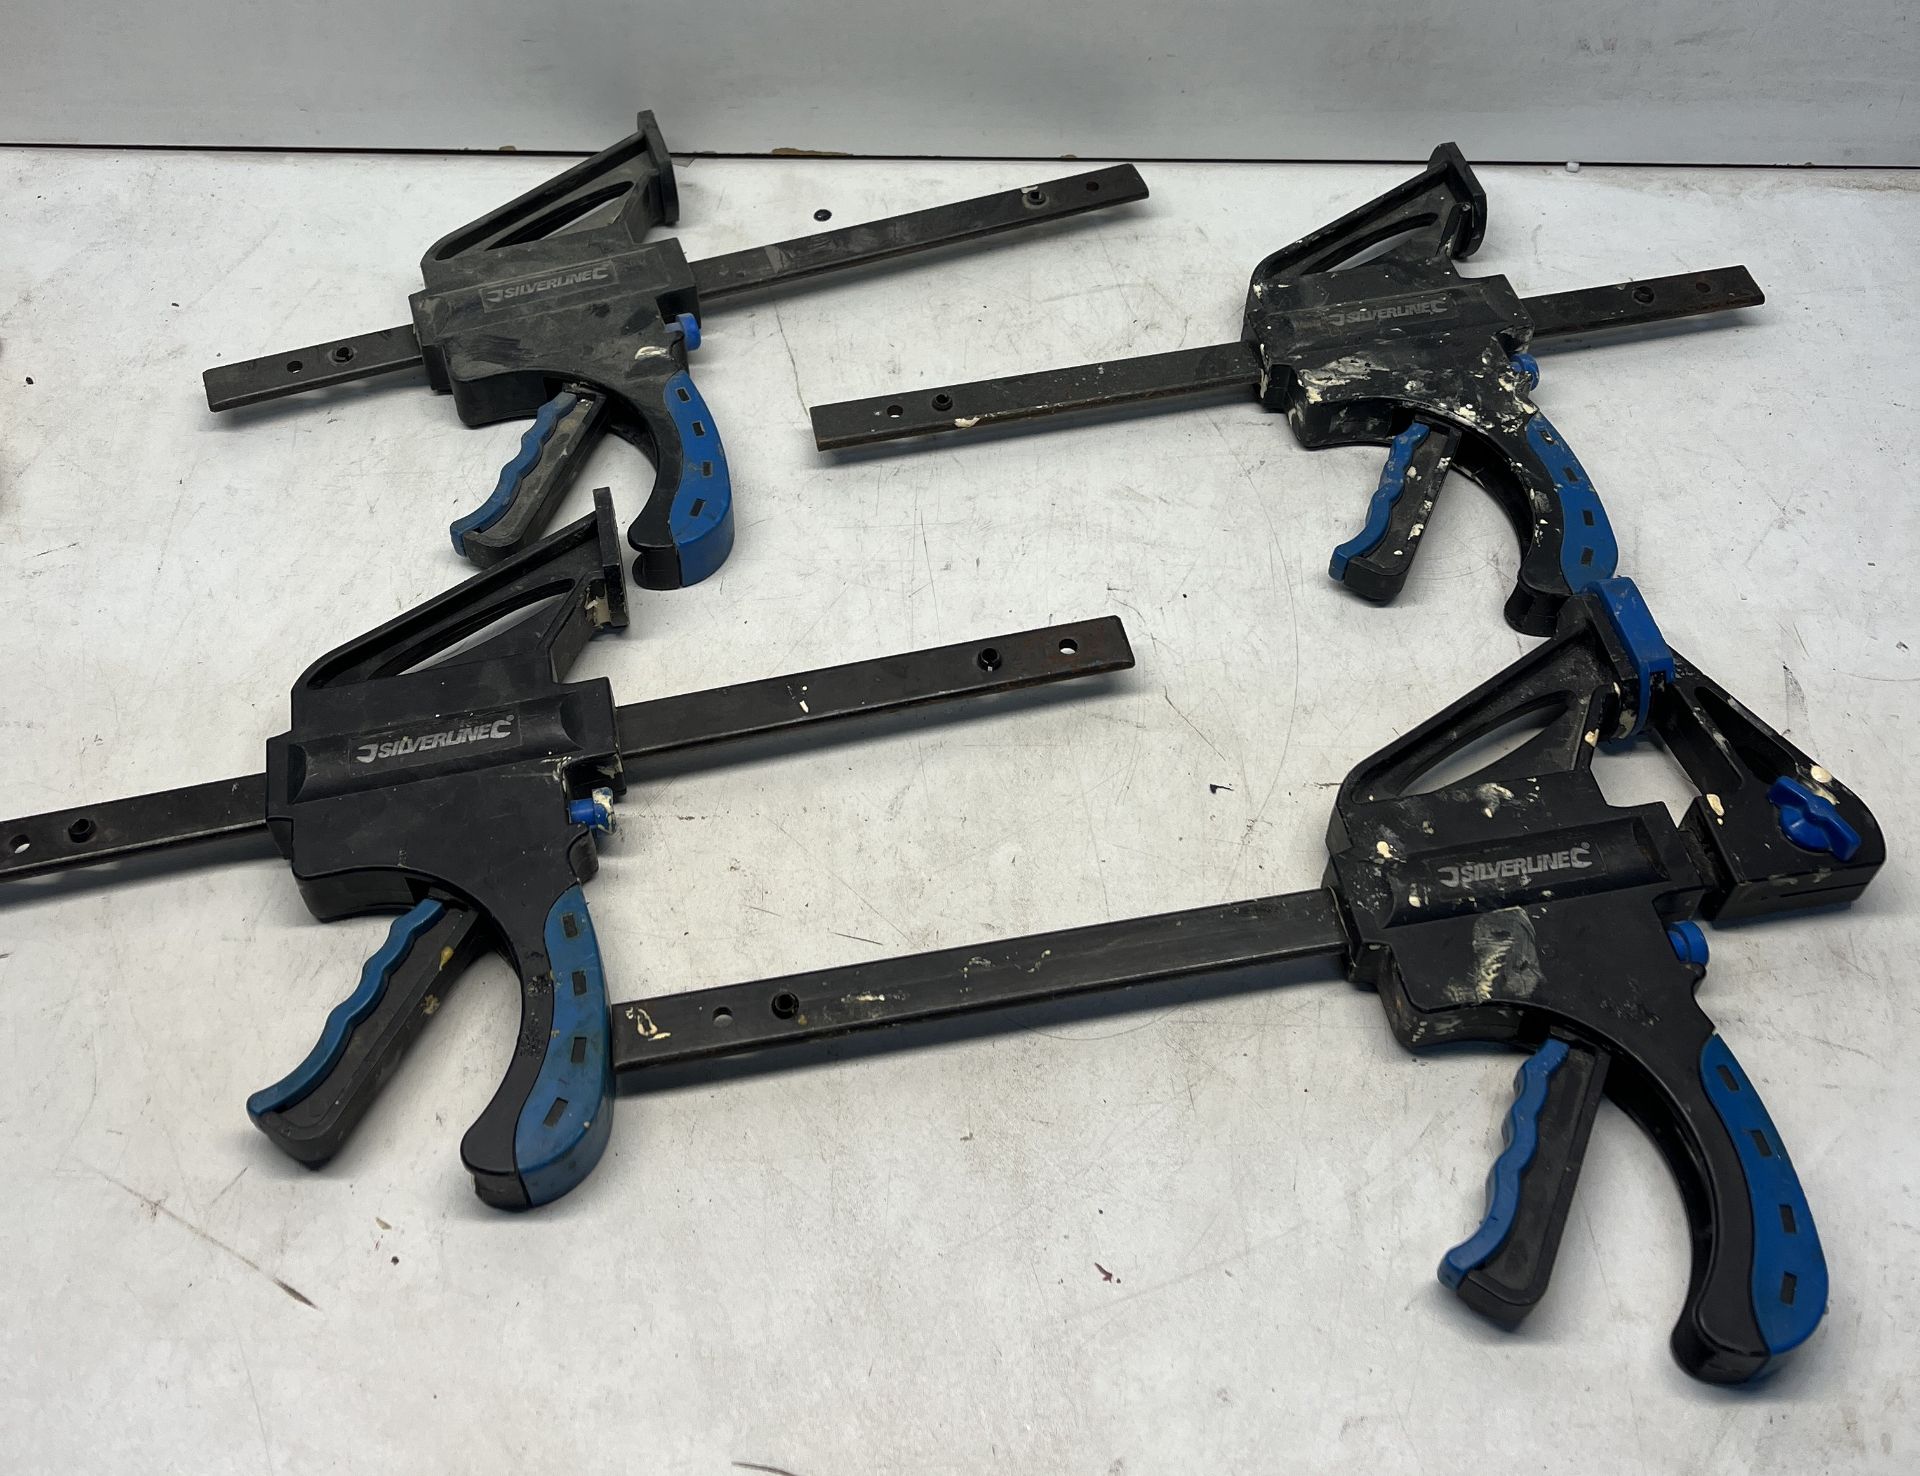 4x Silverline Clamps and Various Tools